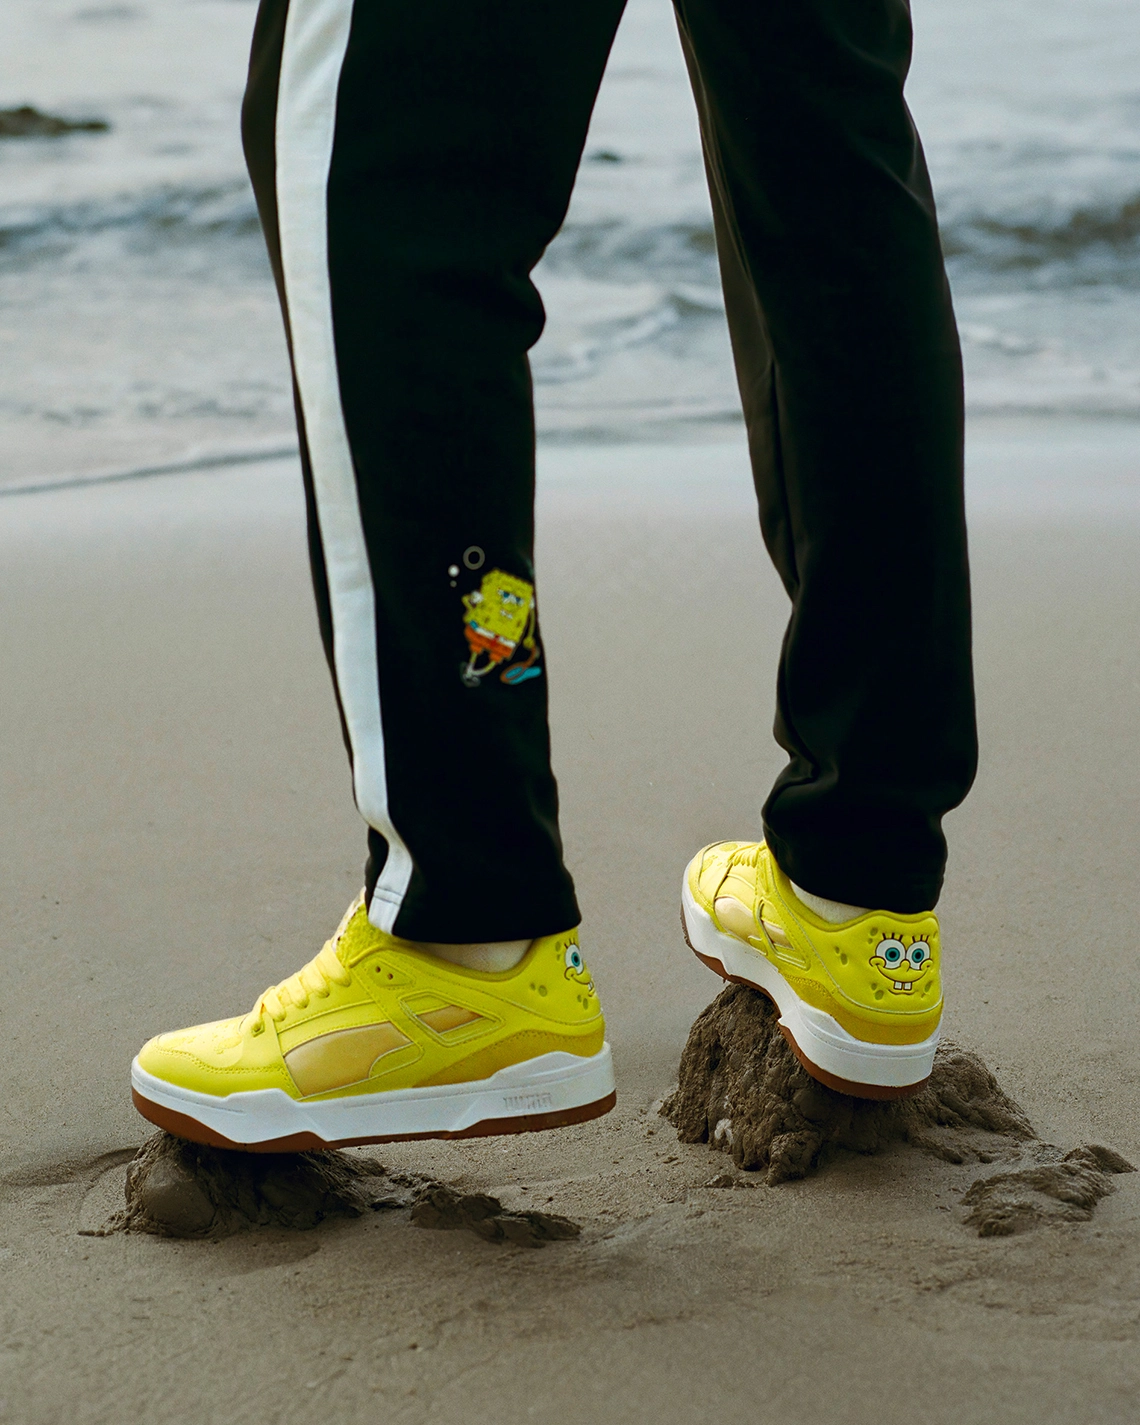 PUMA and SpongeBob SquarePants Team Up for New Collection Dropping March 17th